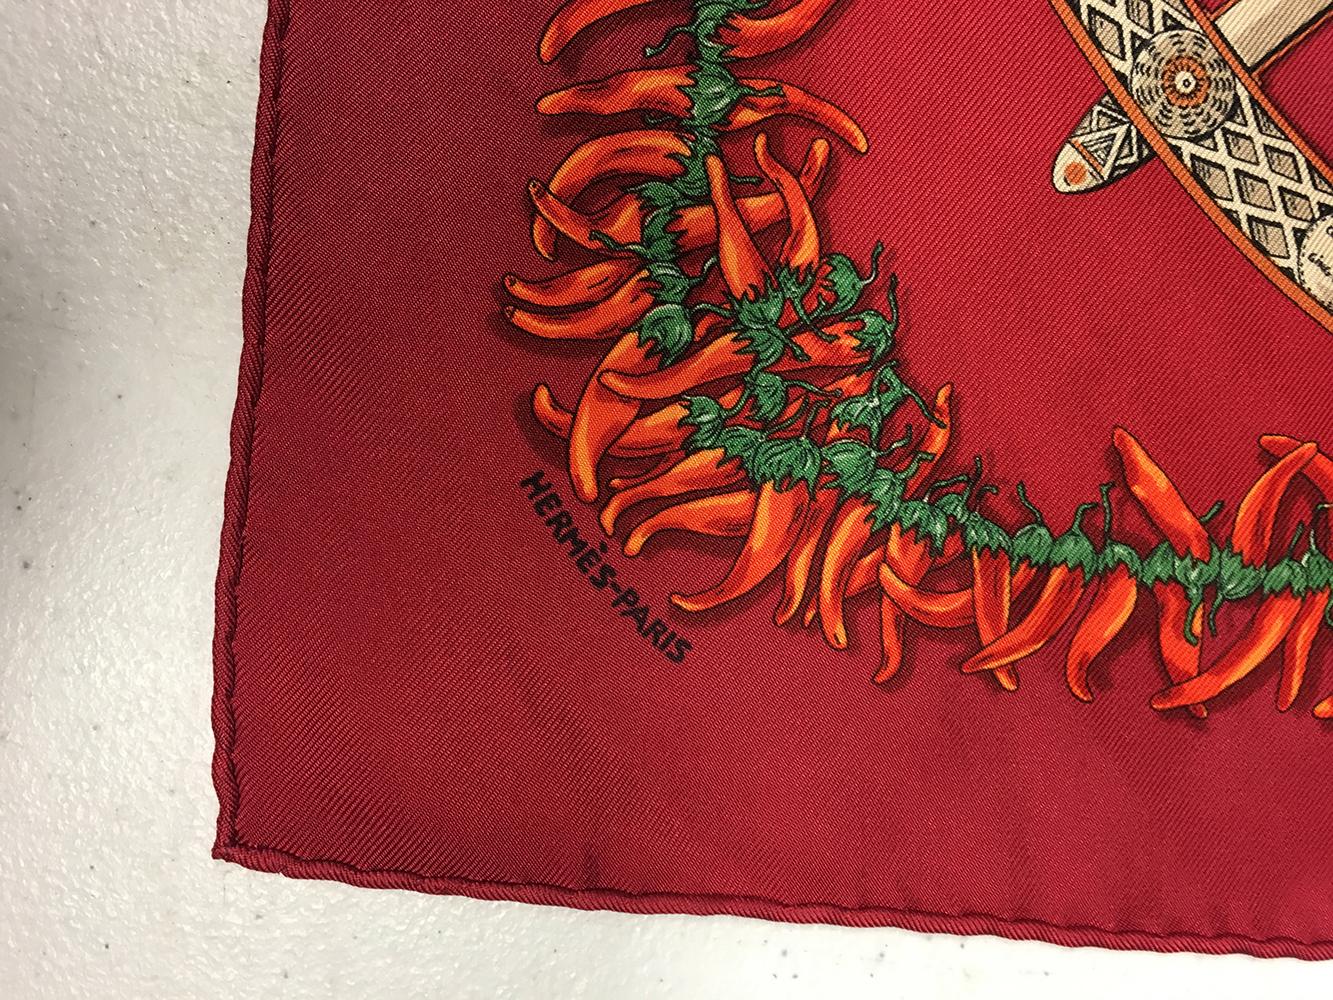 GORGEOUS Hermes Aux Pays des Epices silk pocket square in excellent condition. Original silk screen design c2001 by Annie Faivre features an array of herbs and spices in the center wheel design surrounded by bright chili peppers and a dark red